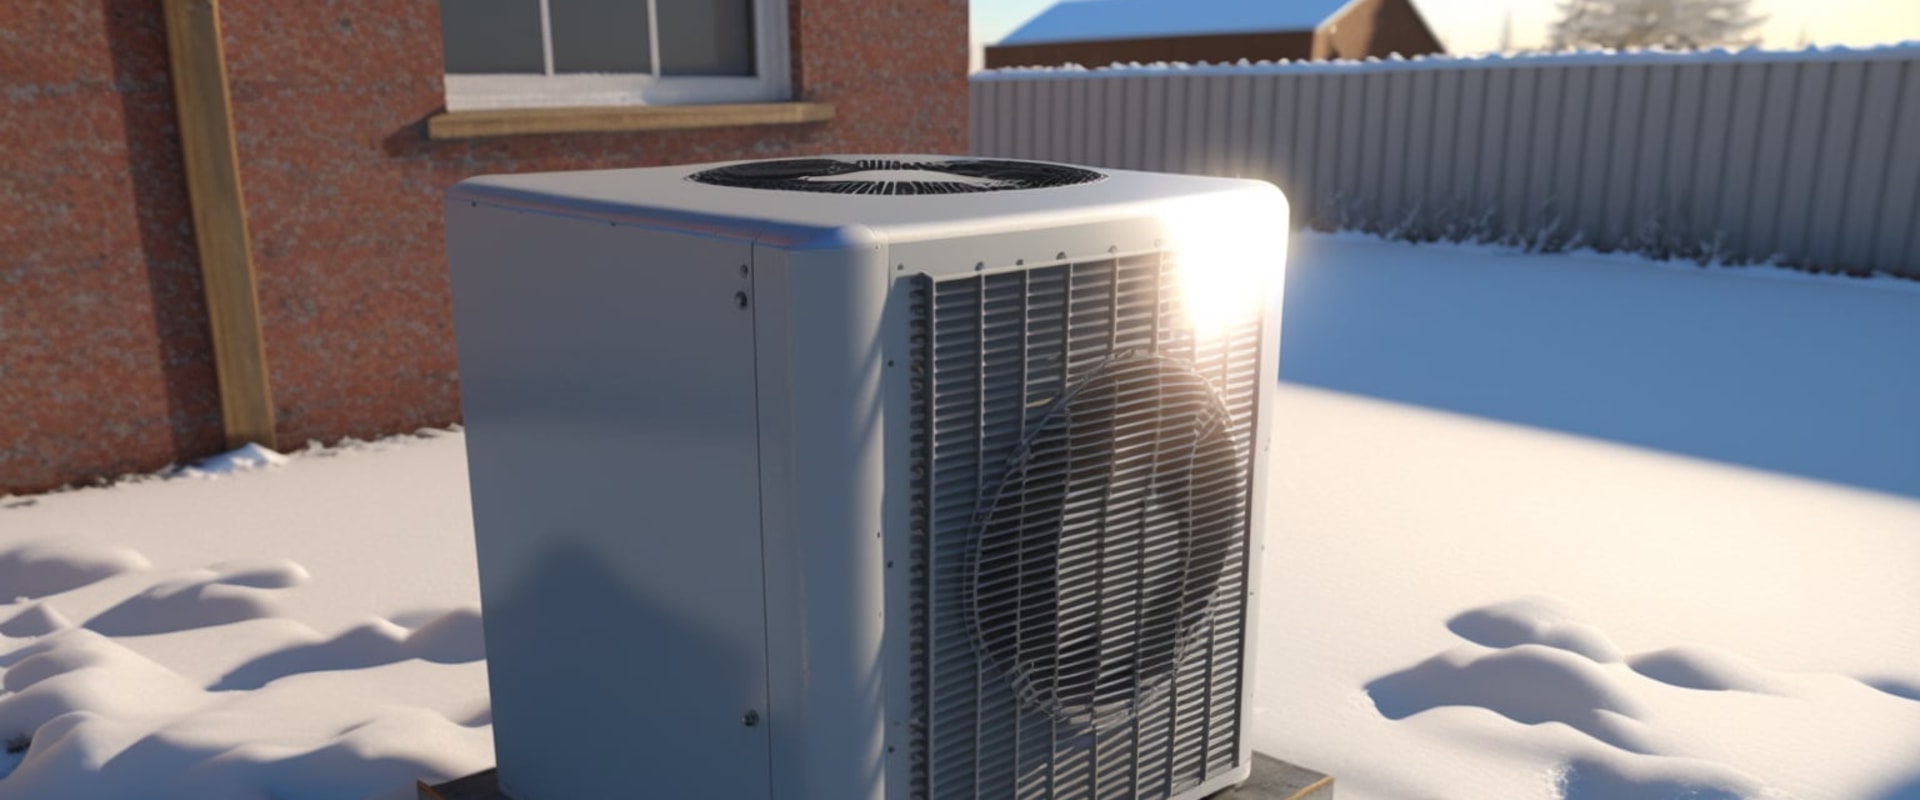 HVAC Repair Services in West Palm Beach, FL: Common Issues and Solutions